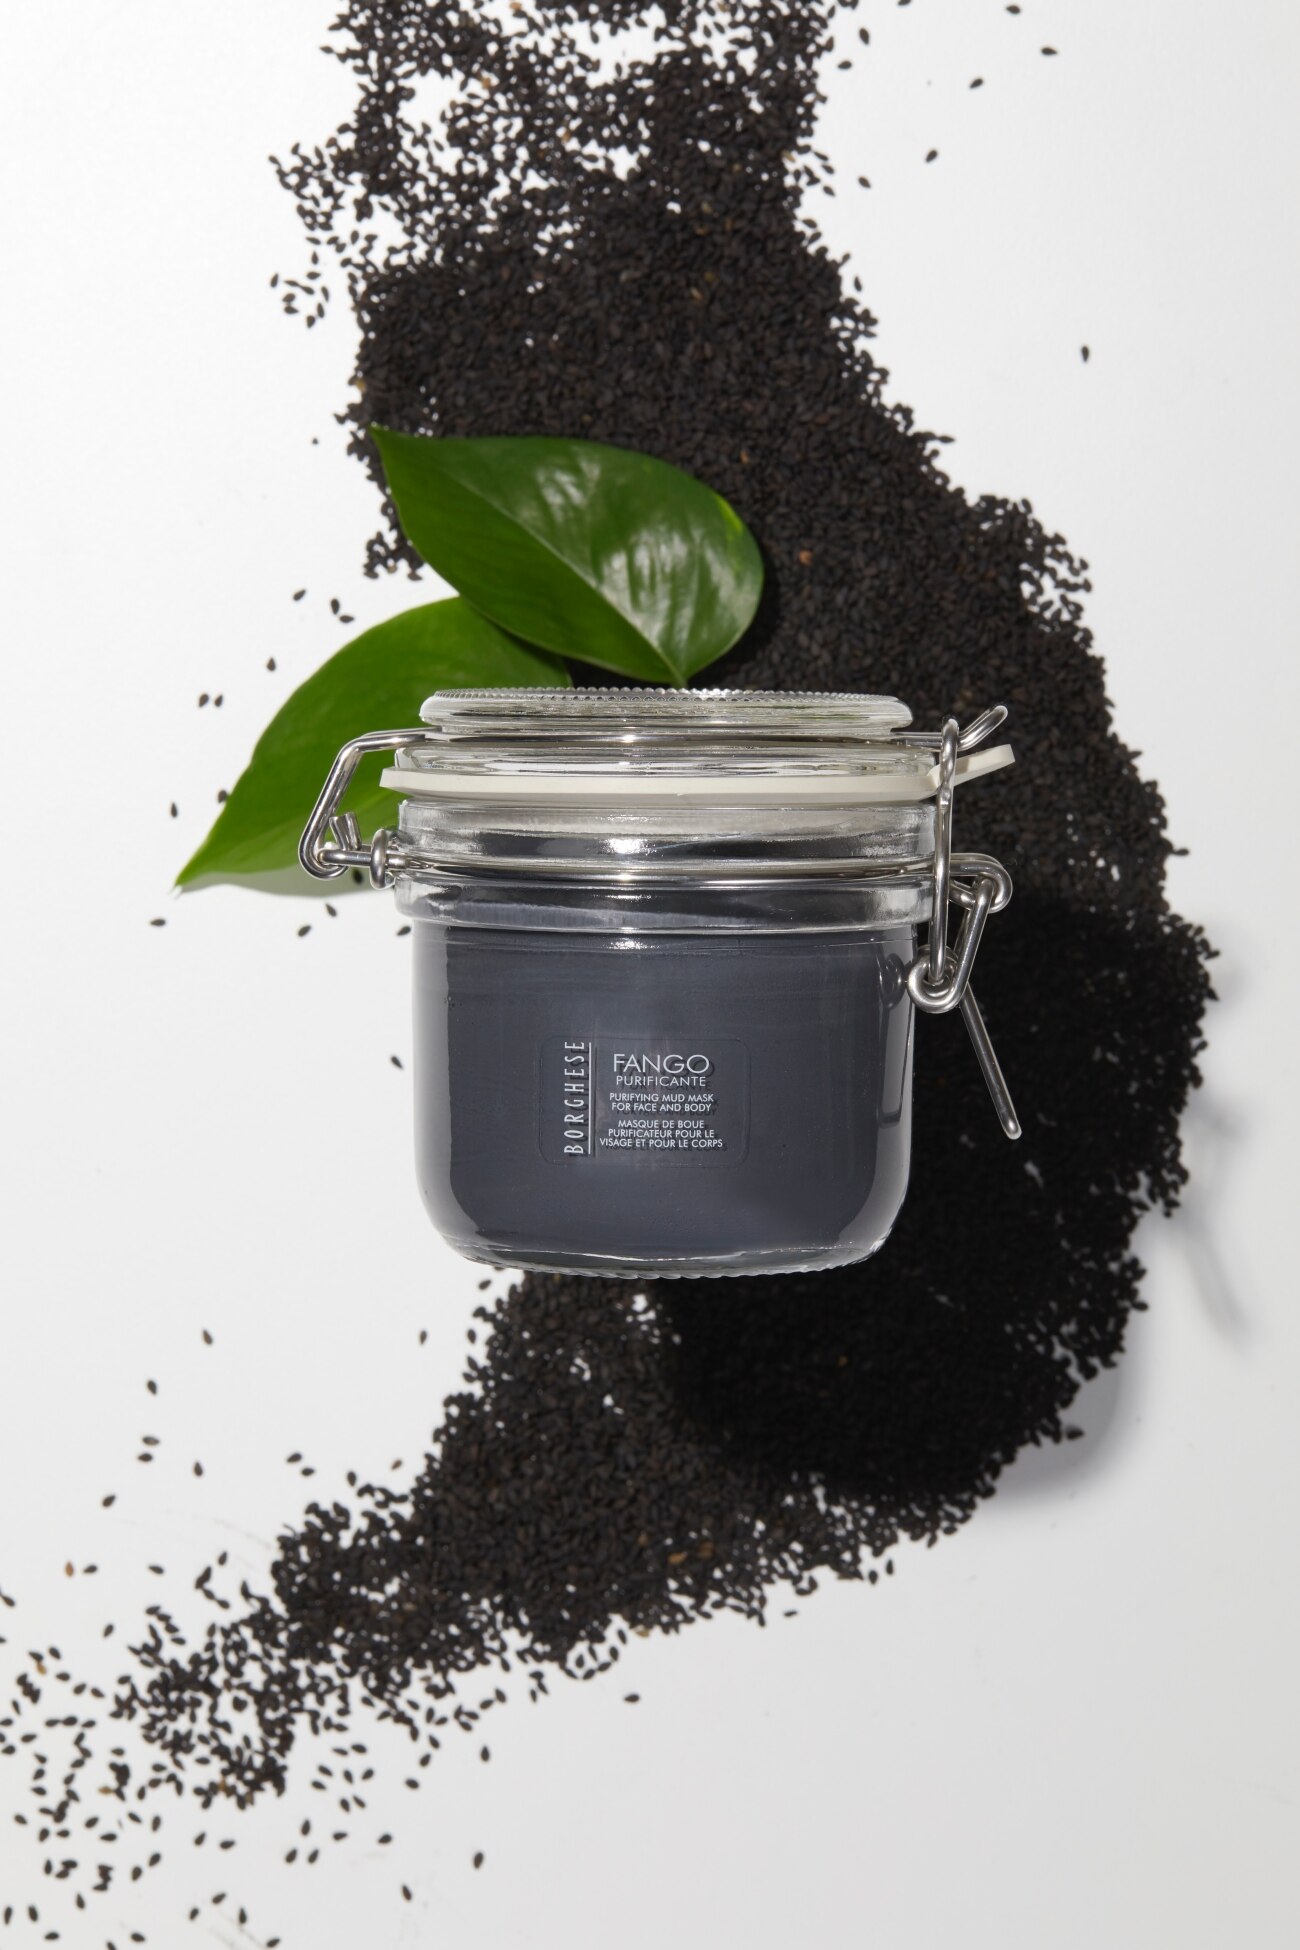 Fango Purificante Purifying Mud Mask for Face and Body 淨透平衡美膚泥漿$750/17.6oz ，$400/7.5oz來自高嶺土